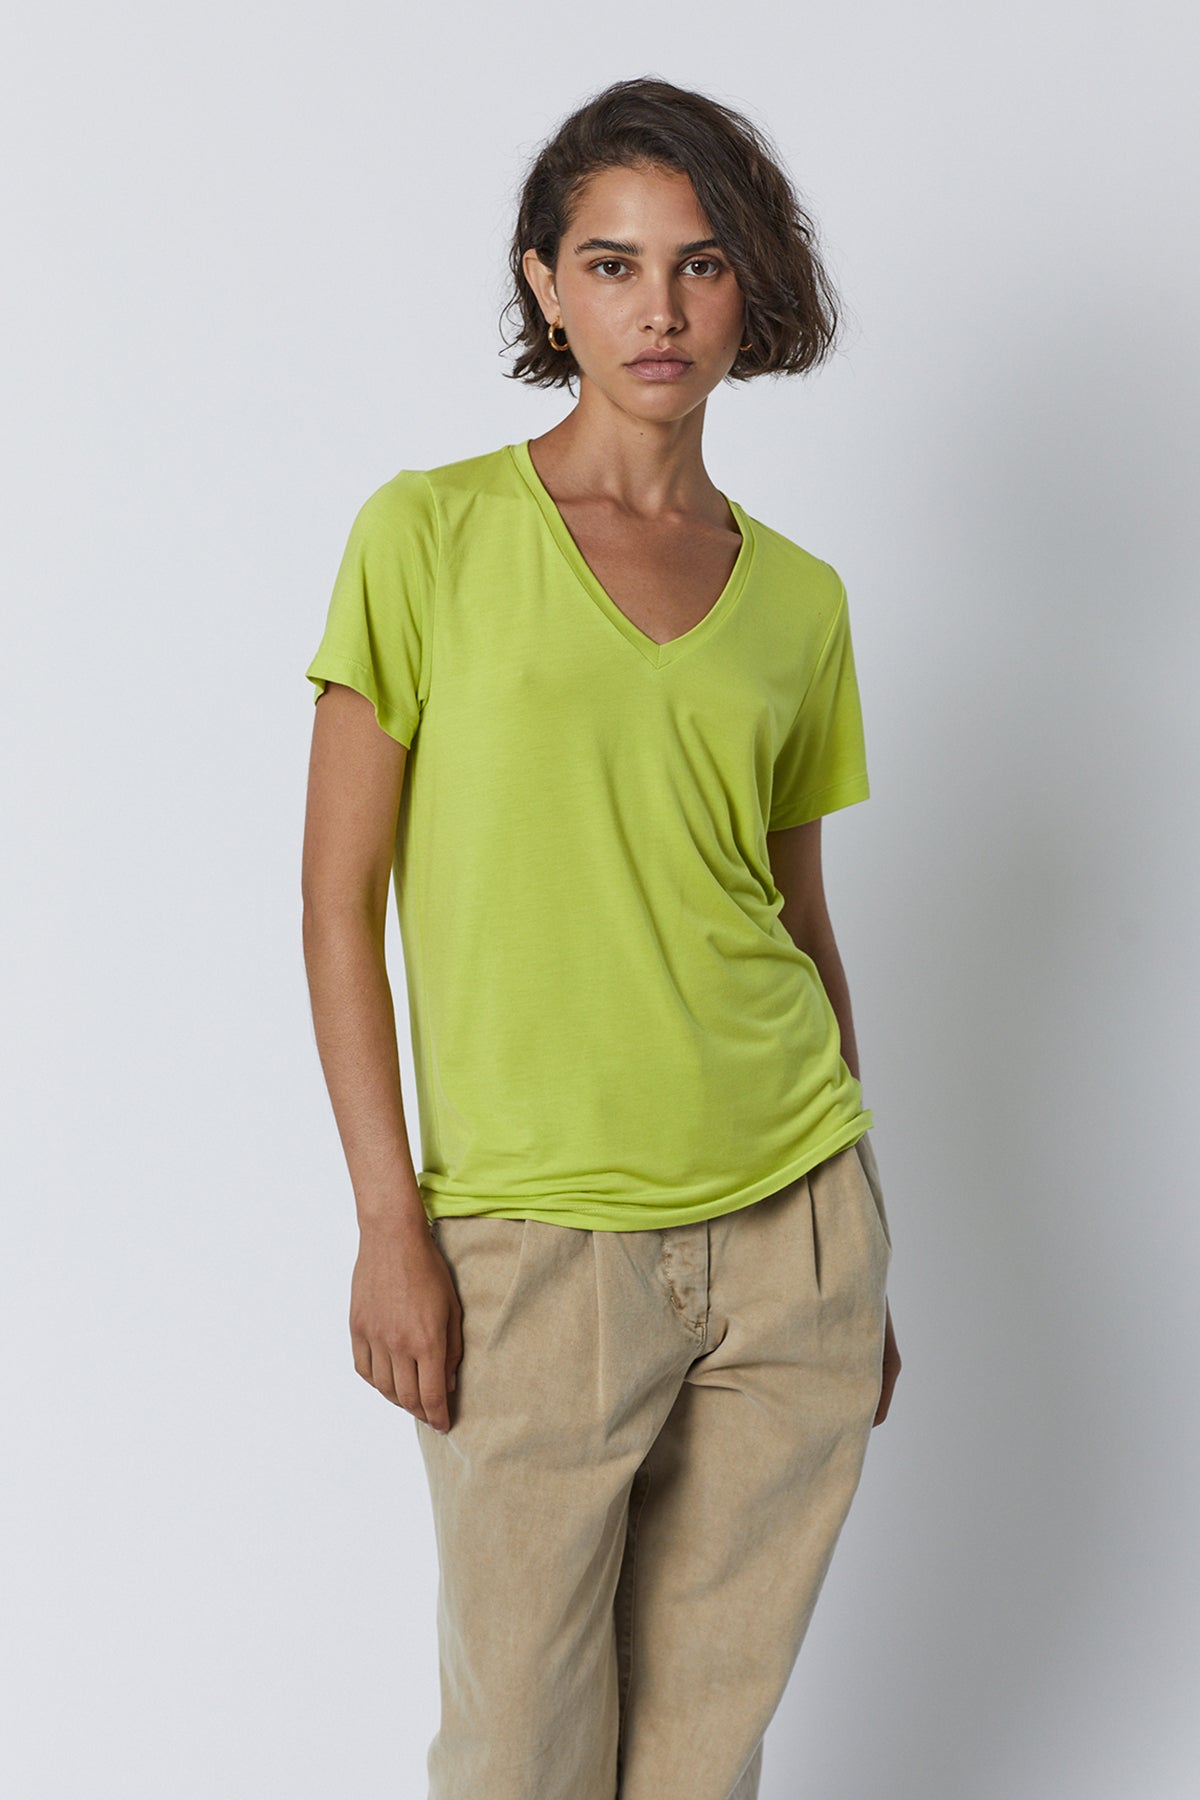 Runyon Tee in lime with Temescal pant in putty front-26007207346369